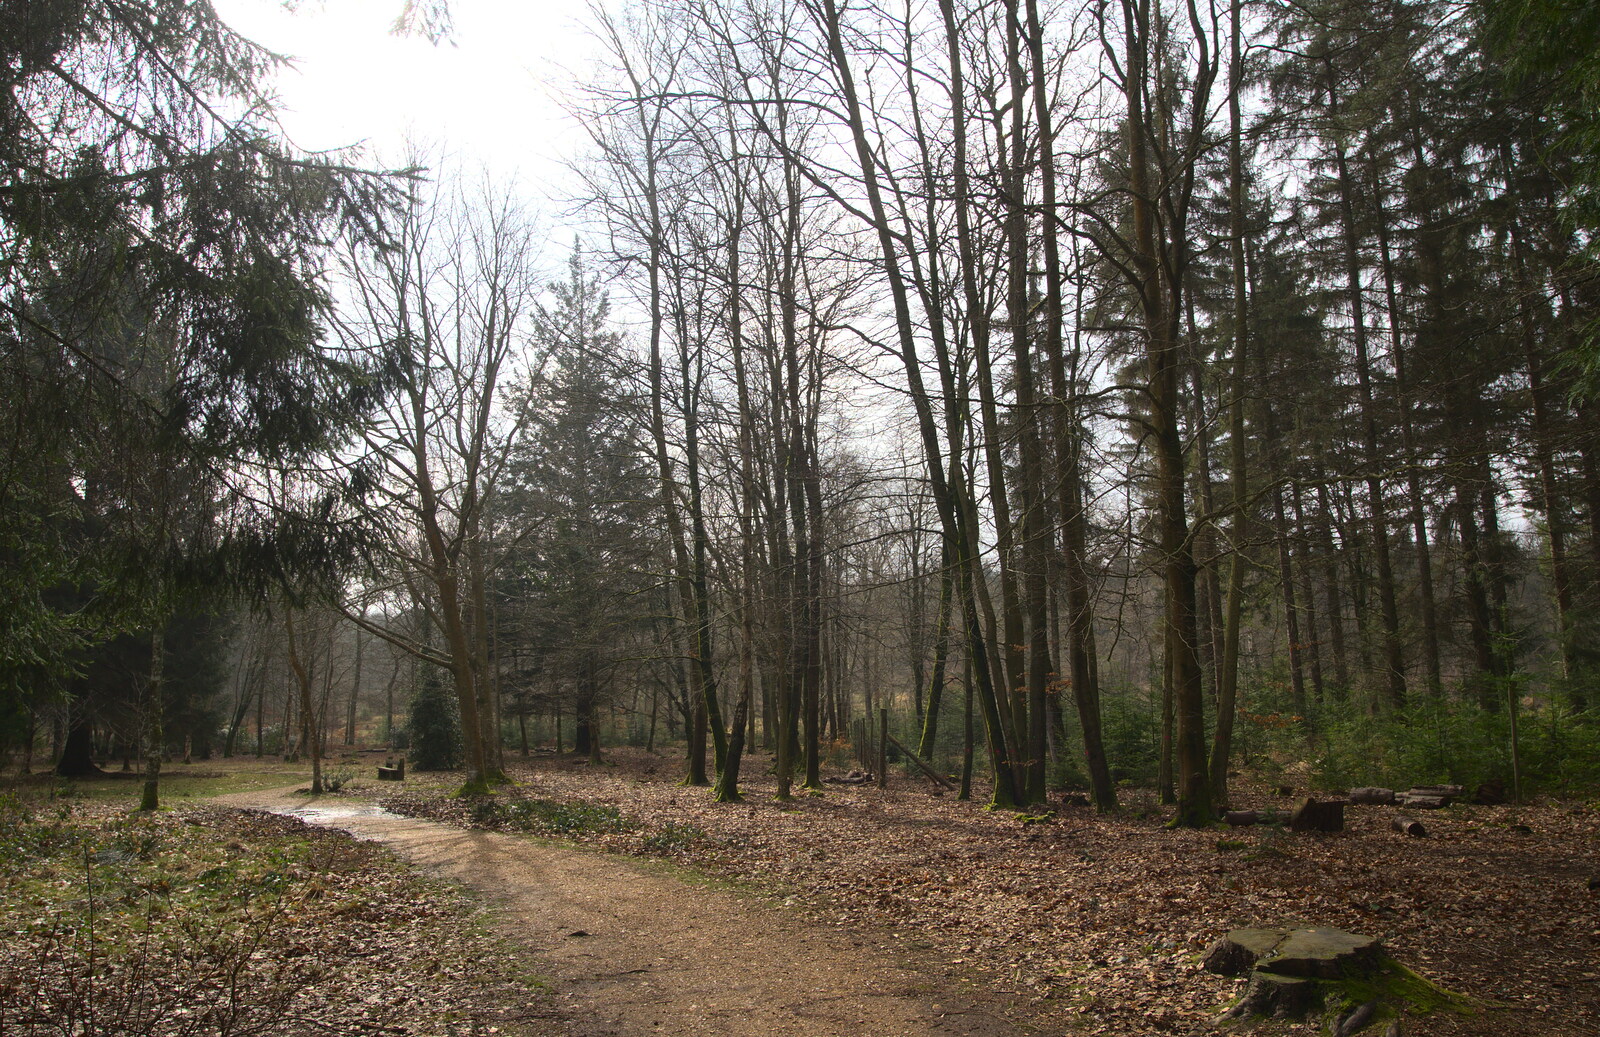 Another forest scene from The Ornamental Drive, Rhinefield, New Forest - 20th March 2013